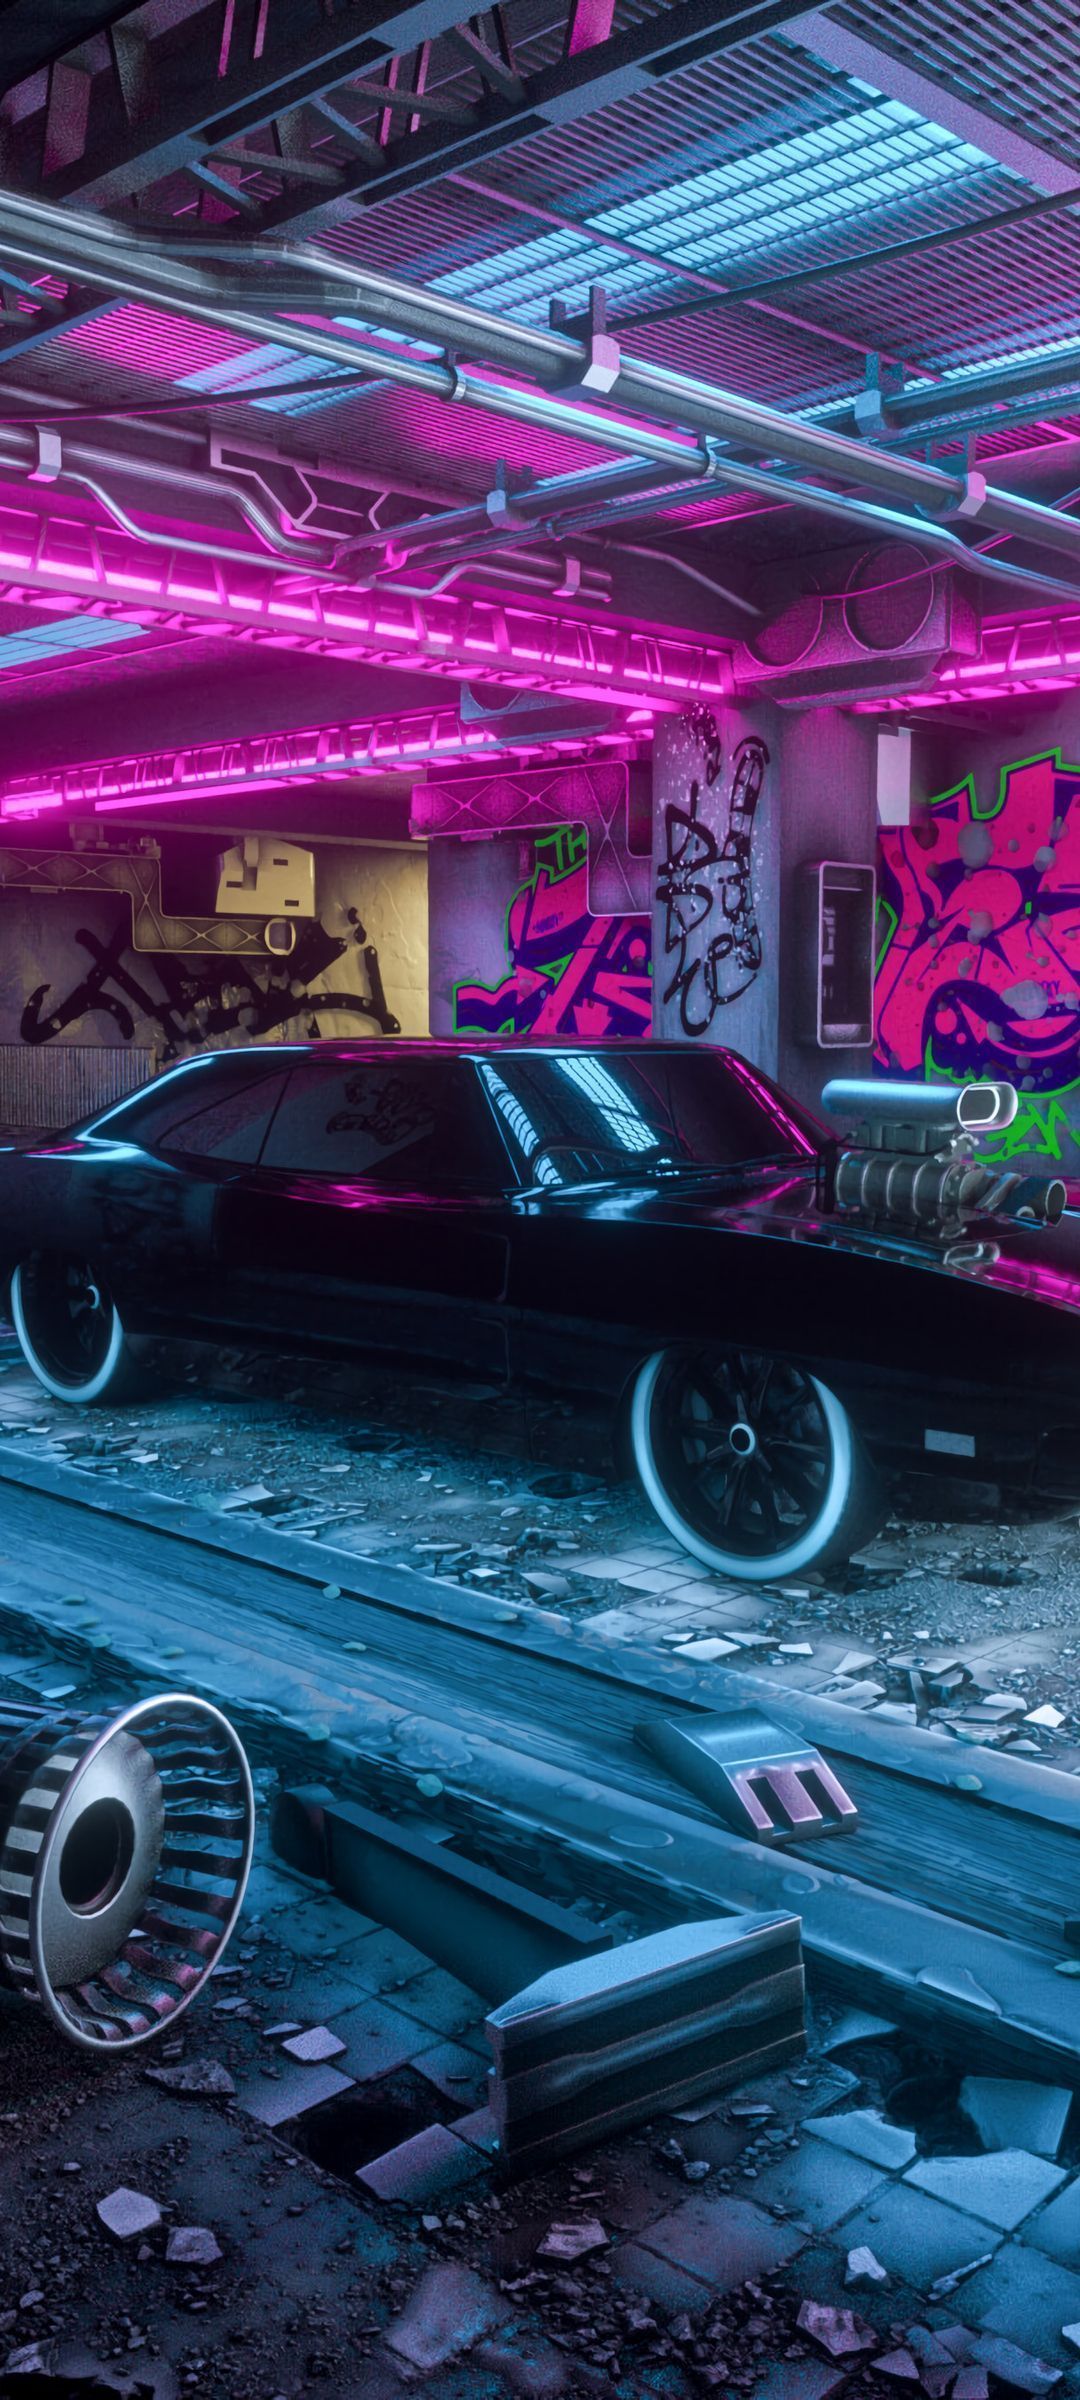 Cyberpunk 2077 wallpaper for iPhone with a car in a garage - 1080x2400